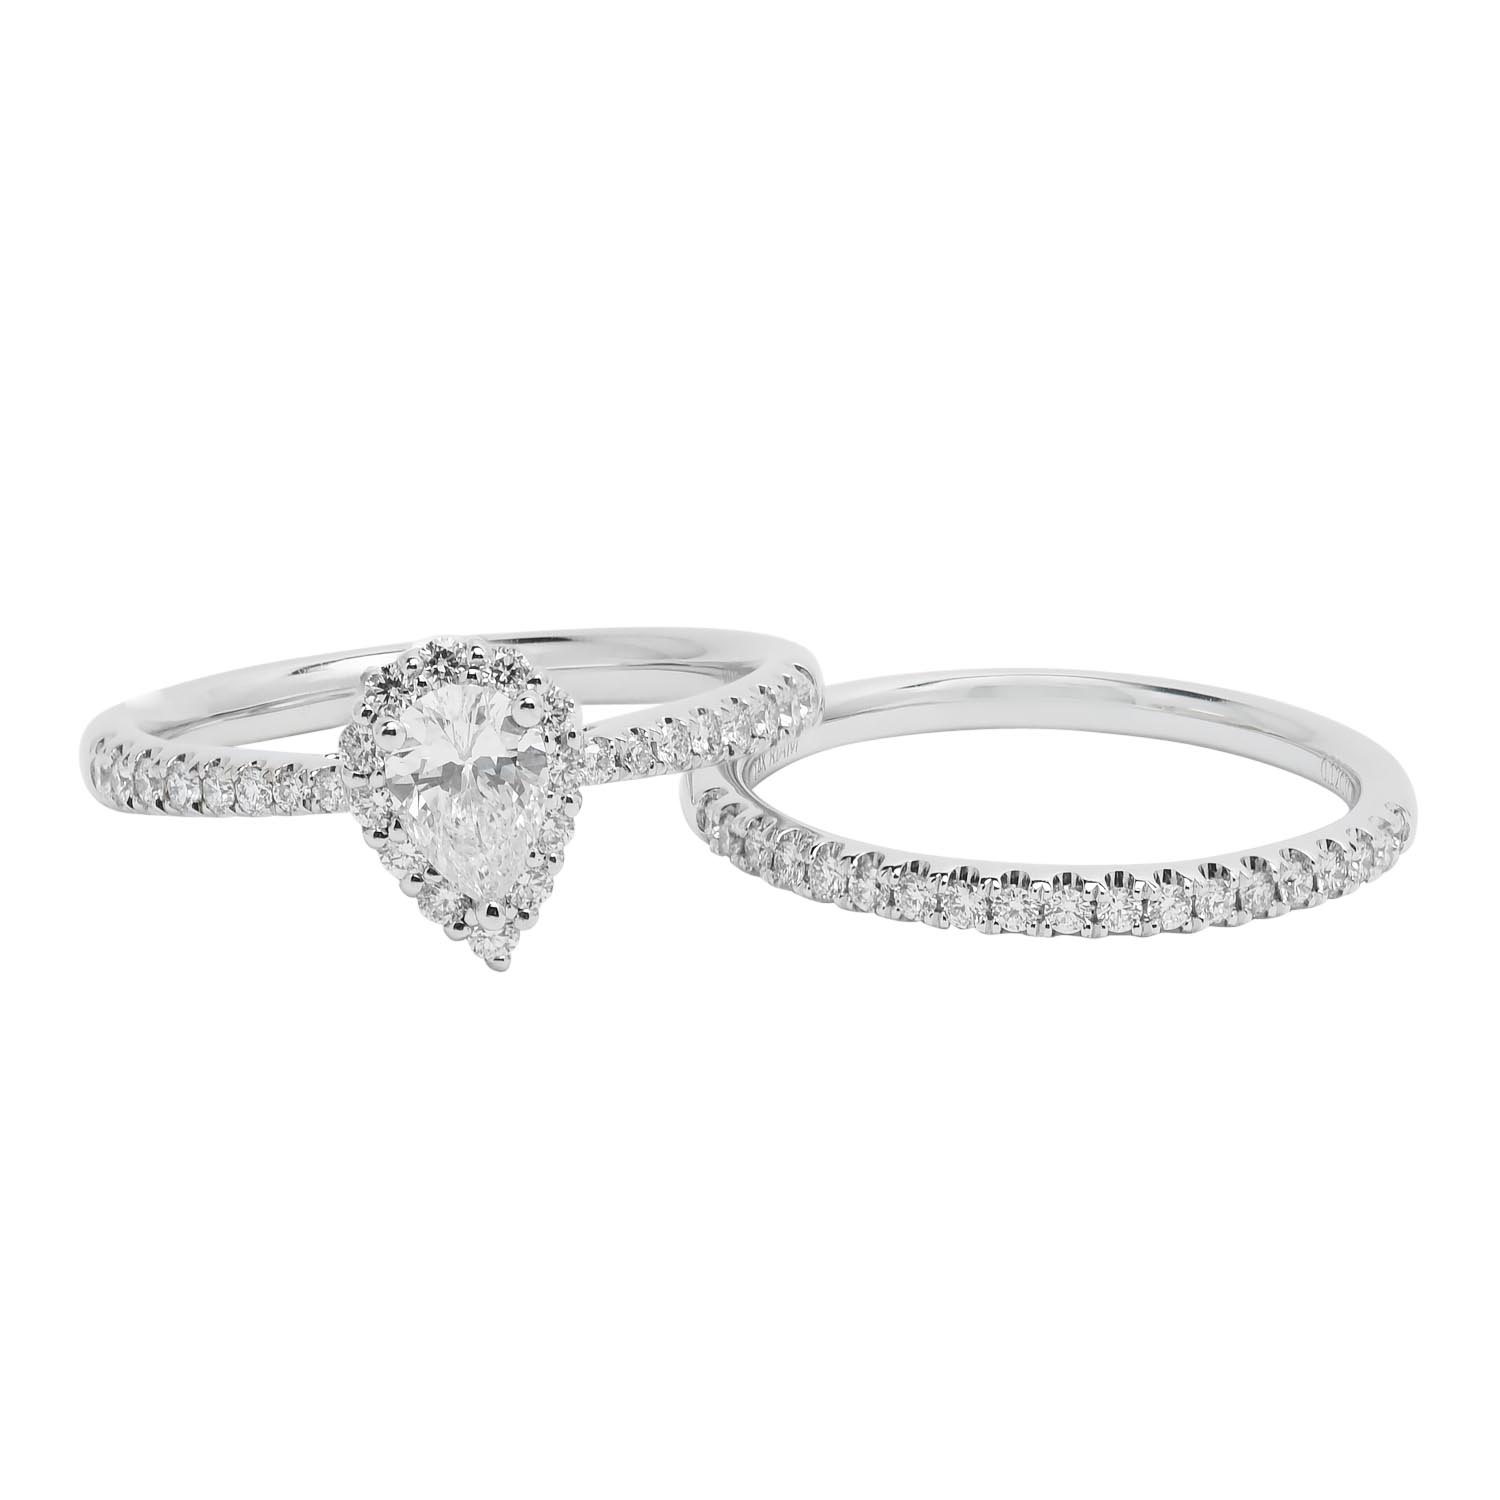 Northern Star Pear Diamond Halo Bridal Set in 14kt White Gold (3/4ct tw)